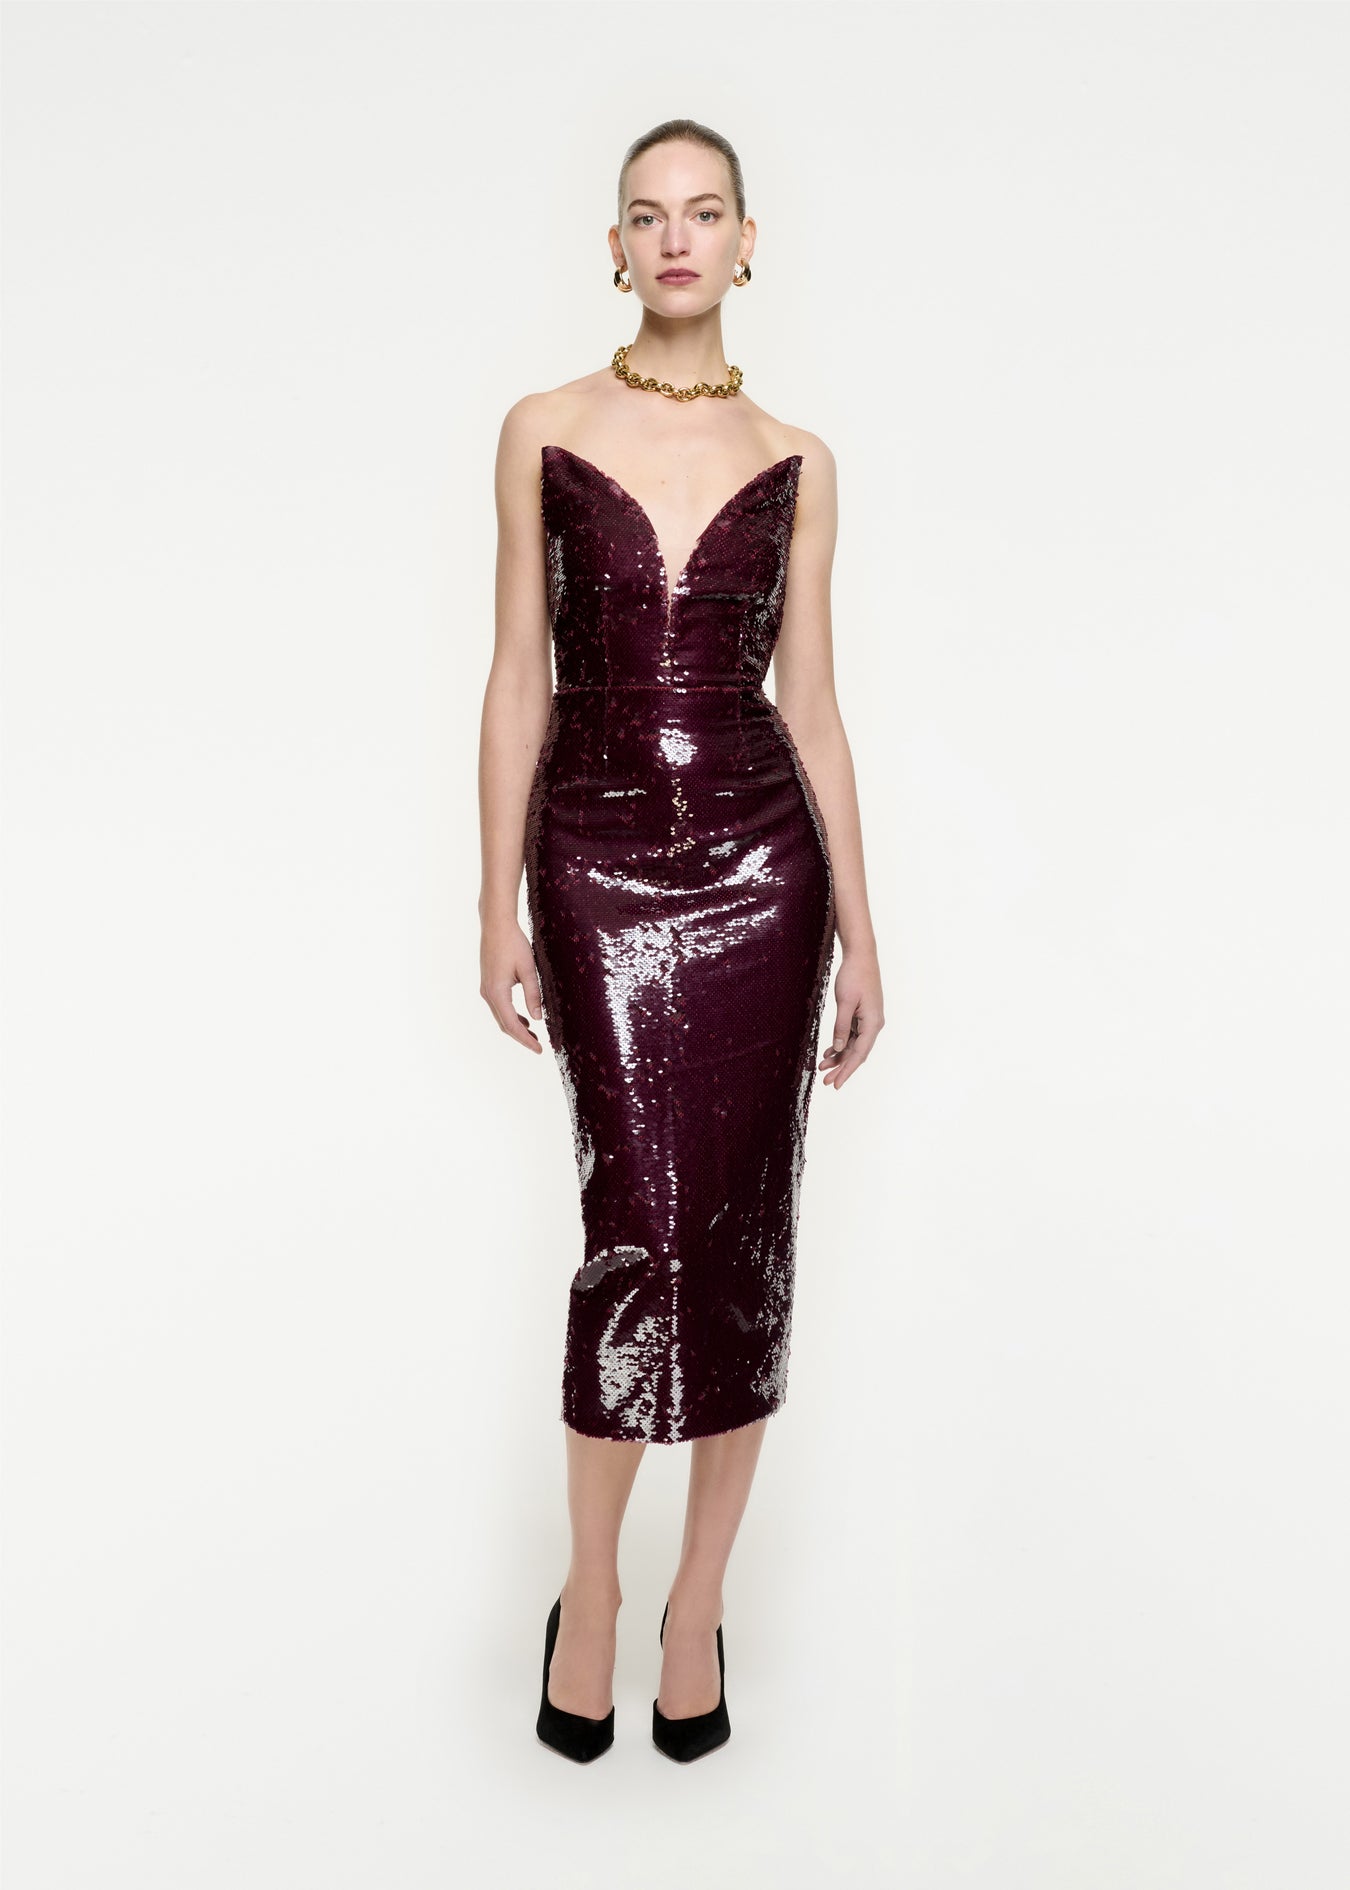 Woman wearing the Strapless Sequin Midi Dress in Maroon